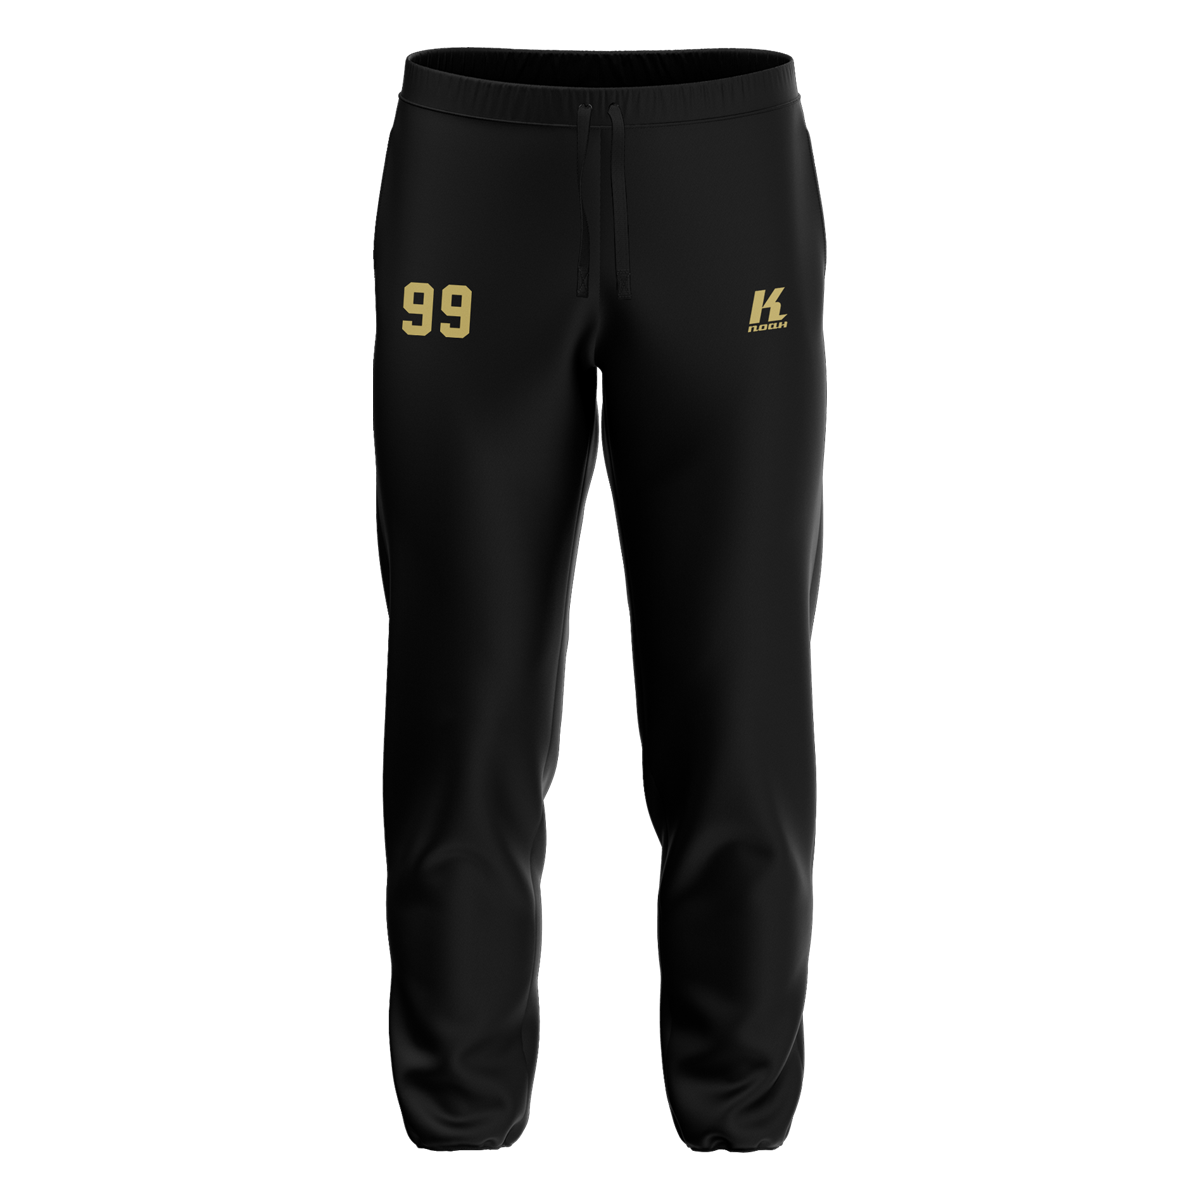 Rangers Sweatpant ST793 black with Playernumber/Initials